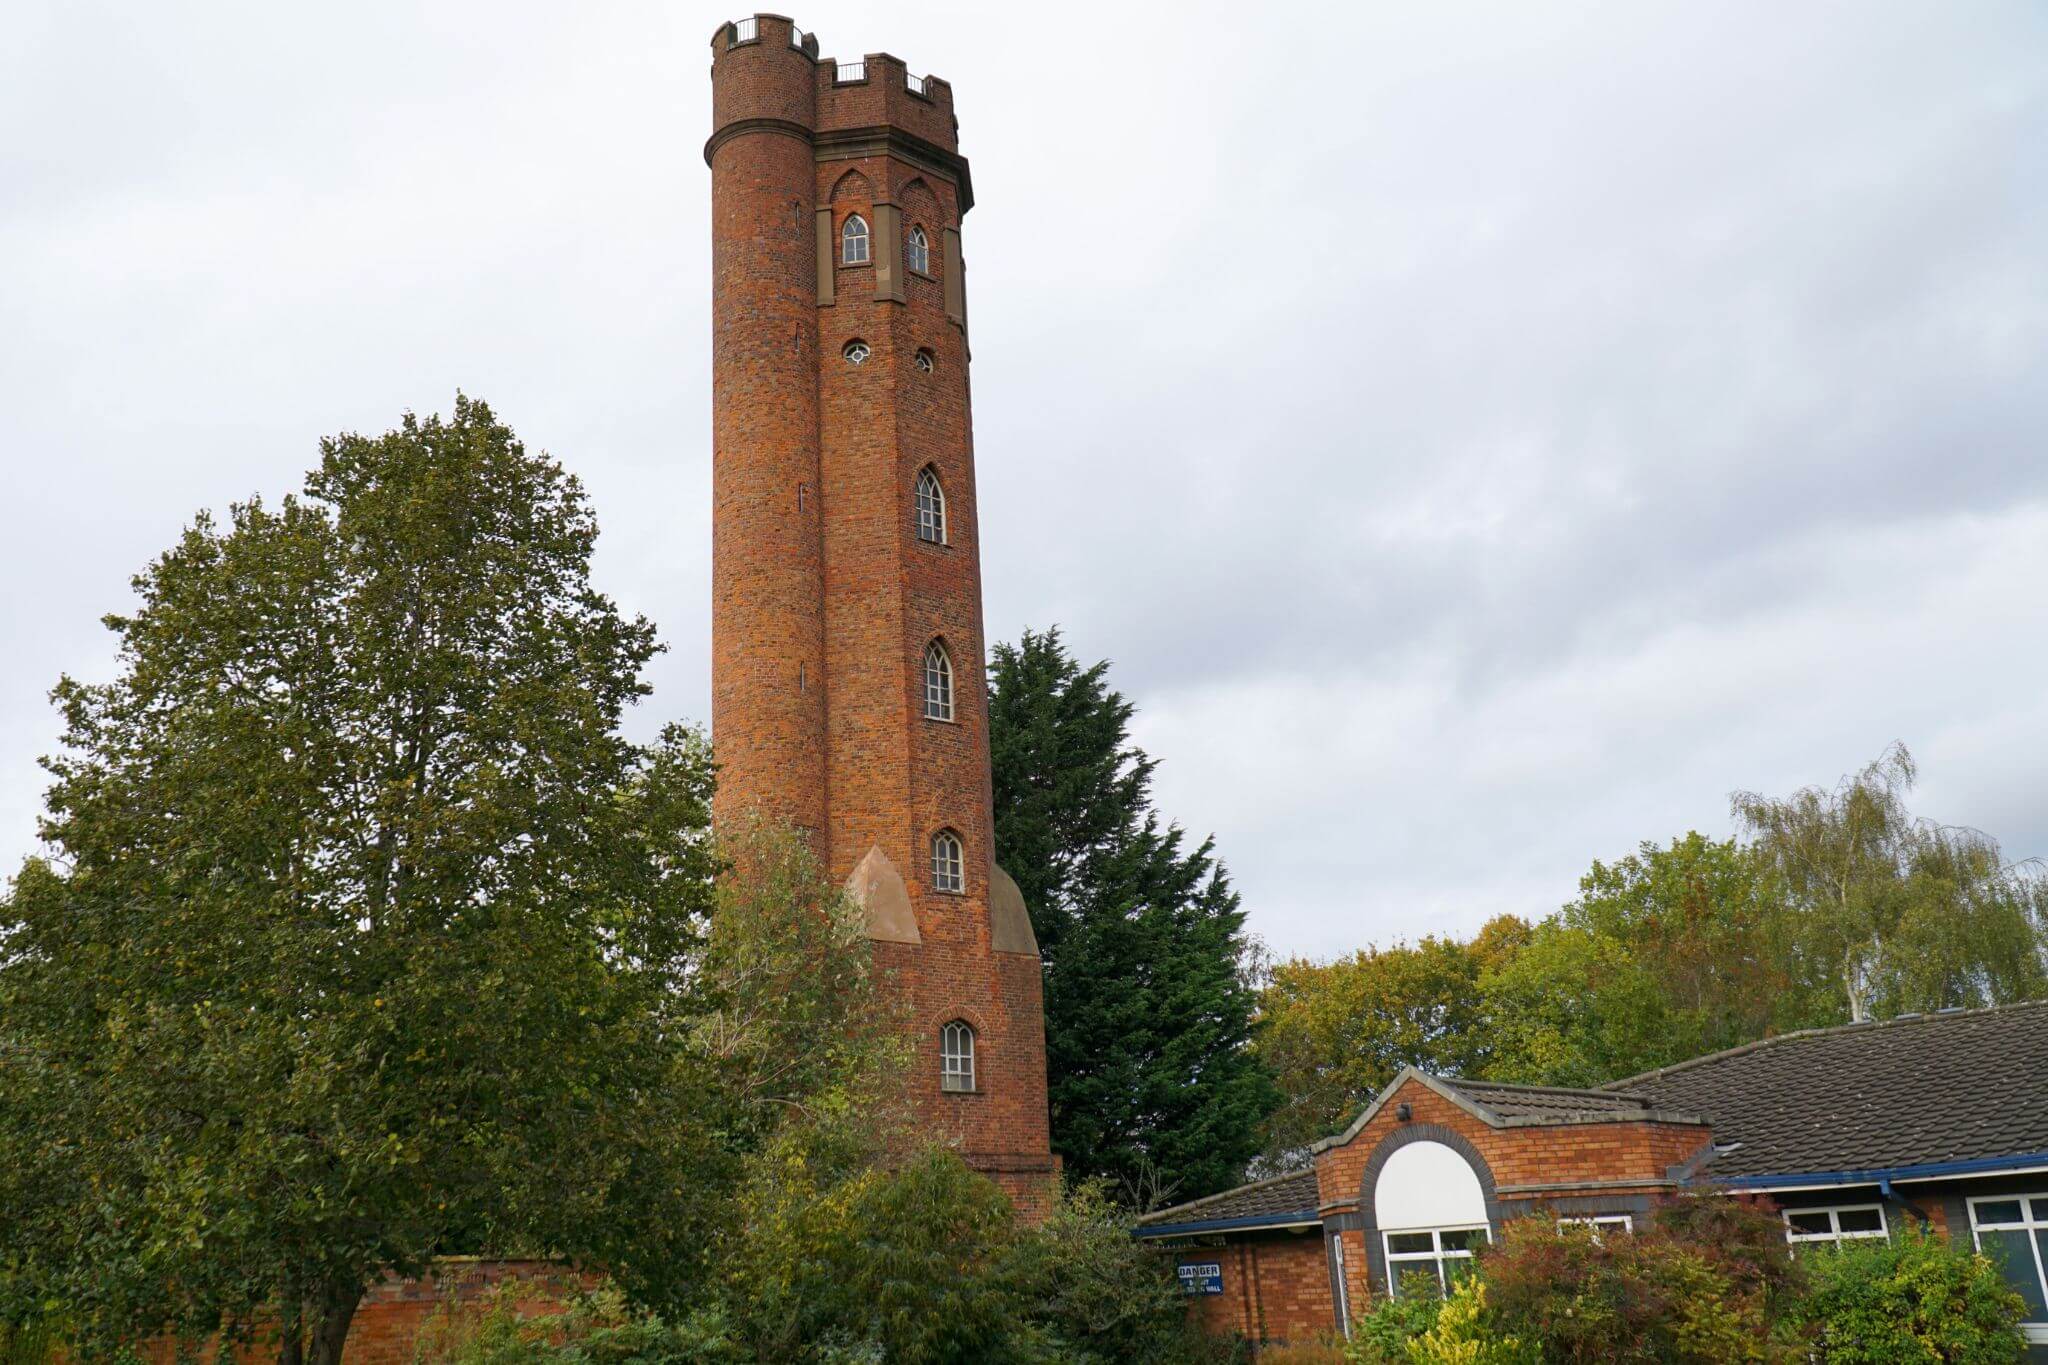 Perrott's Folly - The Original Lord of the Rings Tour - The Birmingham Tolkien Trail